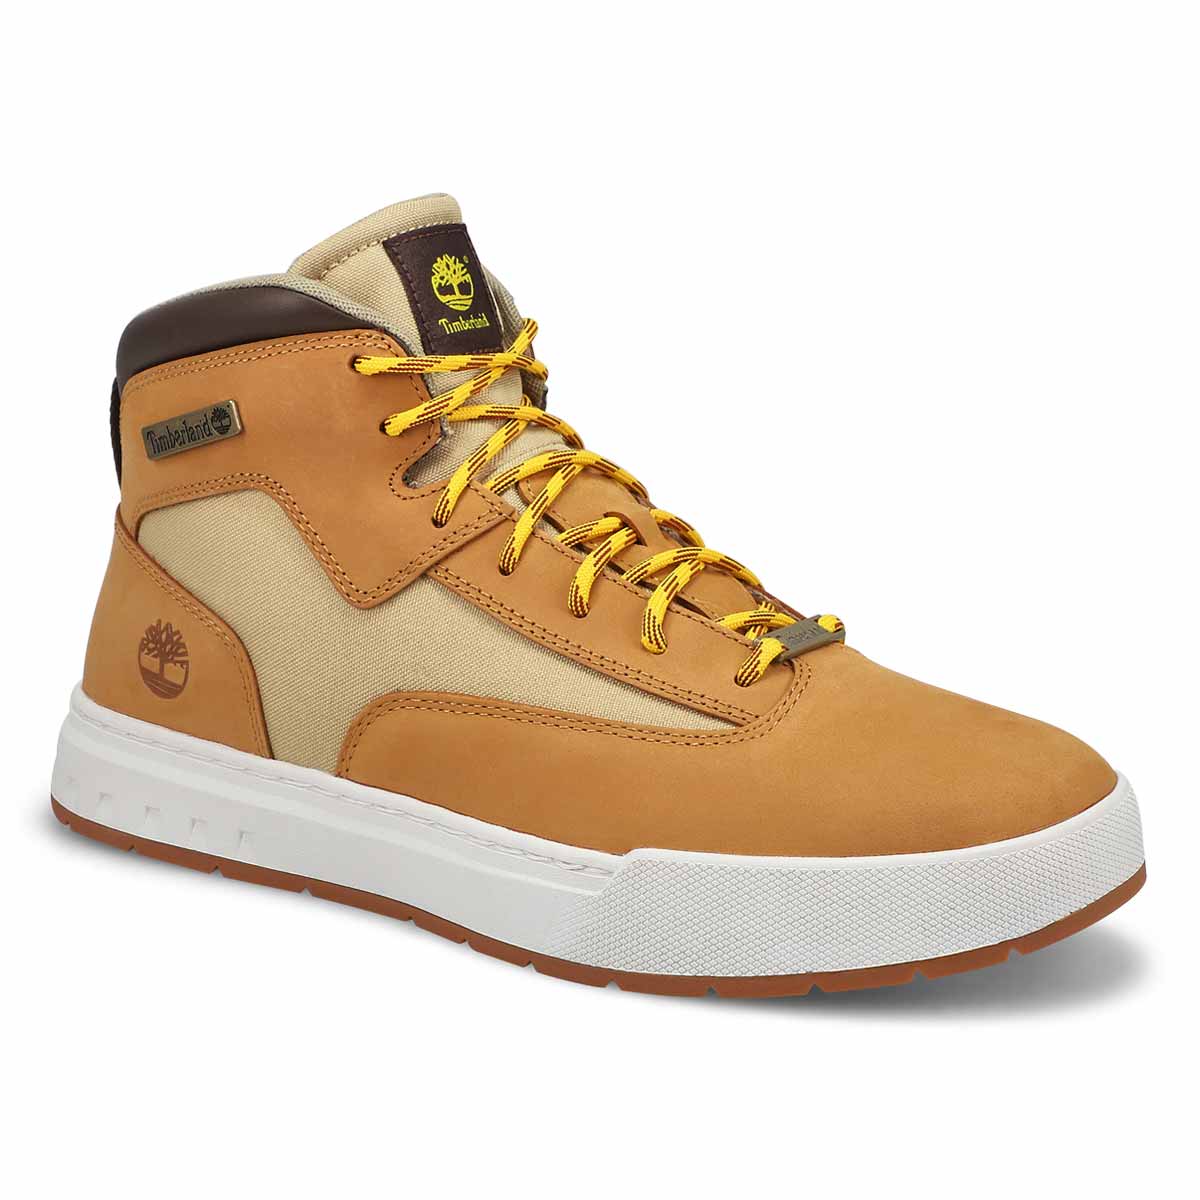 Timberland Men's Maple Grove Casual Boot - Bl | SoftMoc.com